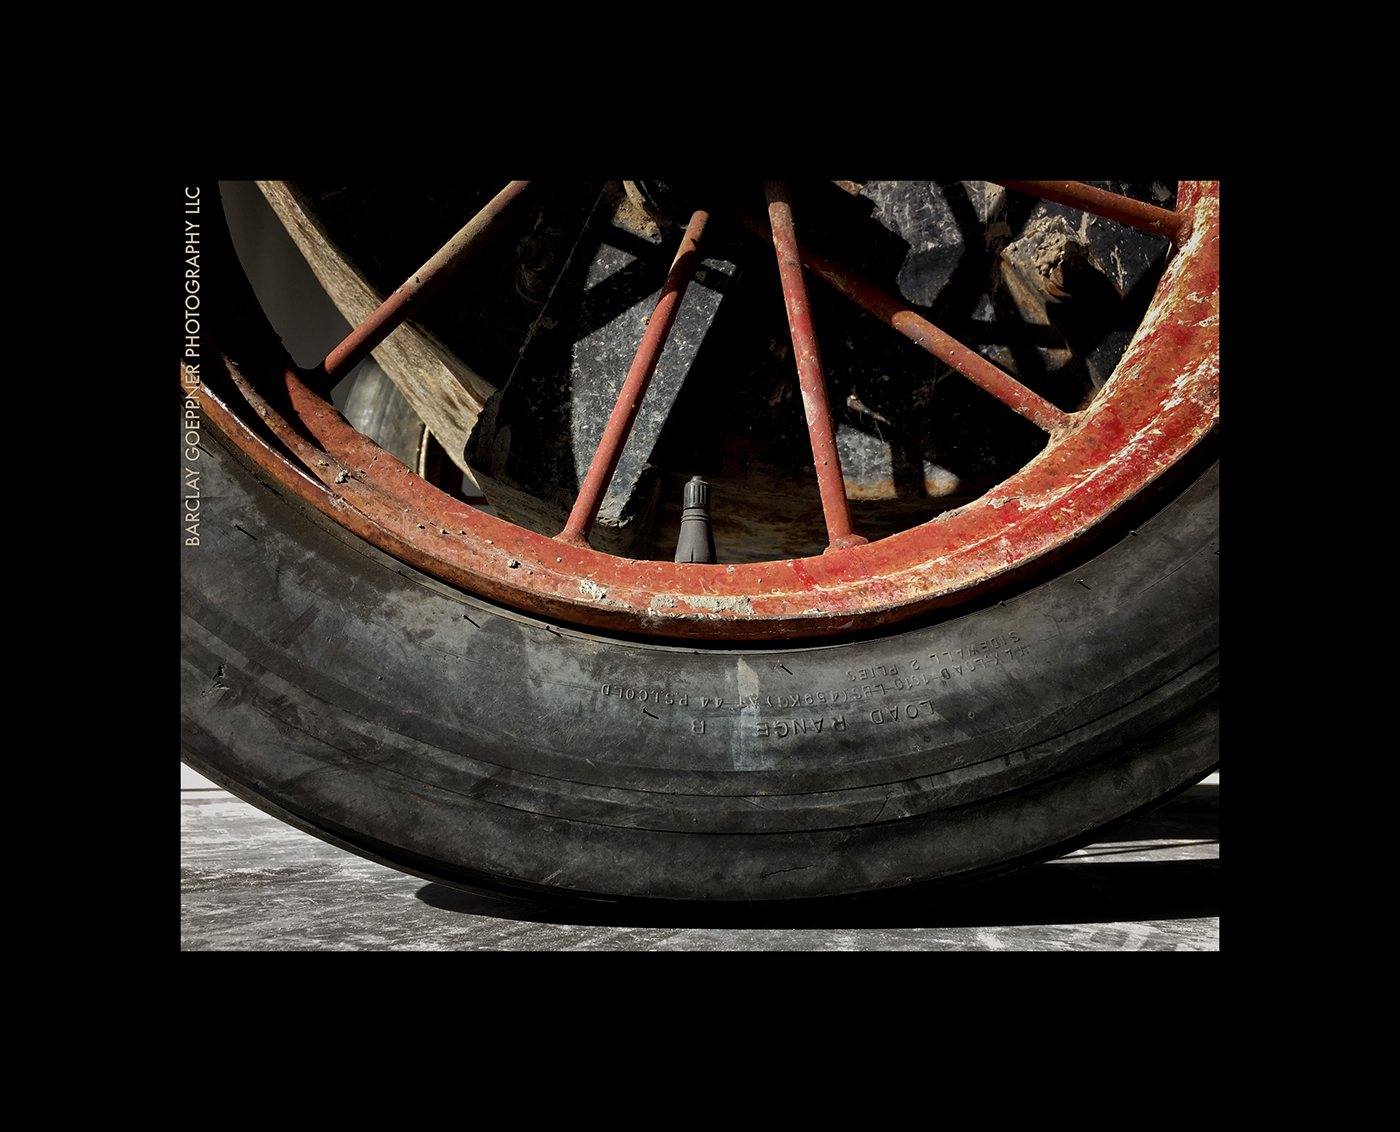 Old Rim old tires wagon wheel construction